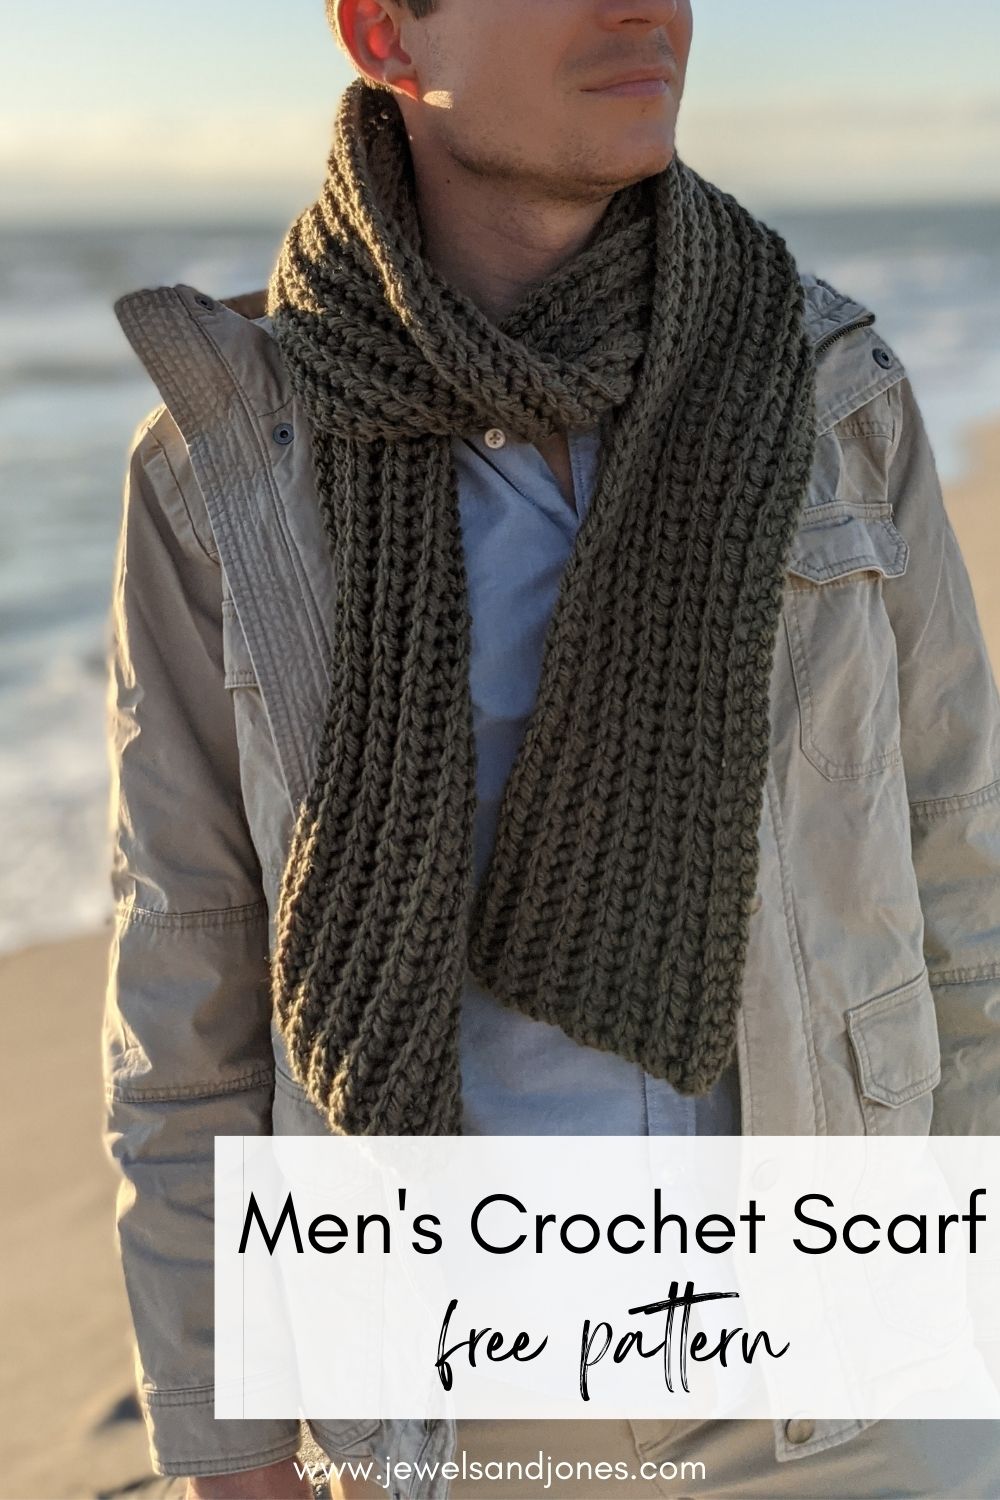 A guy is wearing a classic ribbed crochet scarf on the beach.